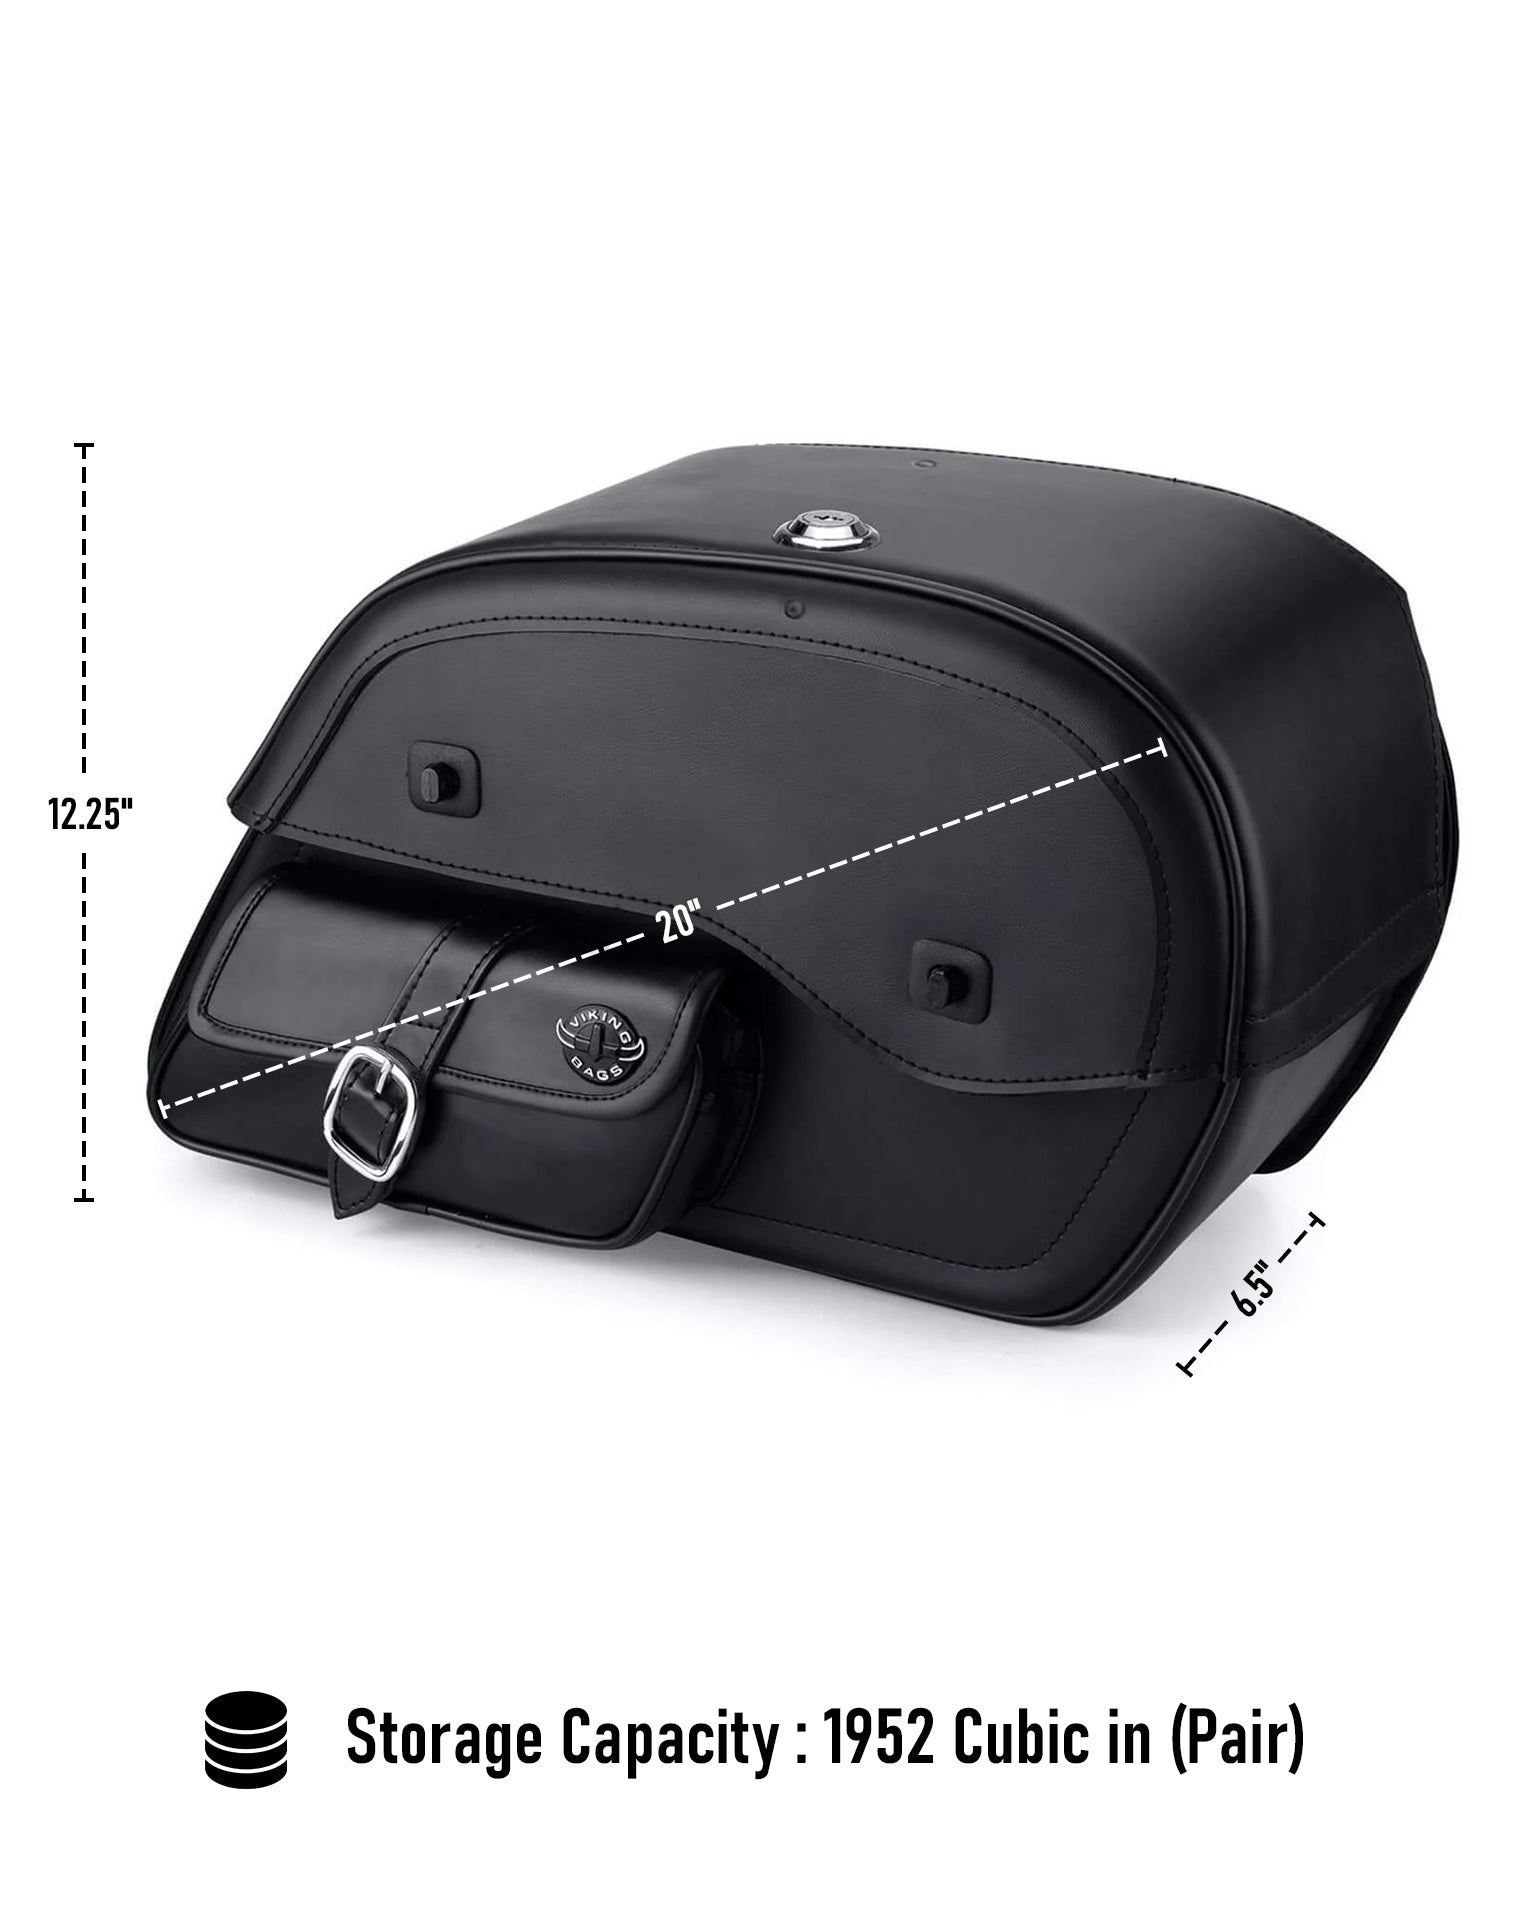 Viking Essential Side Pocket Large Yamaha V Star 1100 Custom Xvs11T Leather Motorcycle Saddlebags Can Store Your Ridings Gears